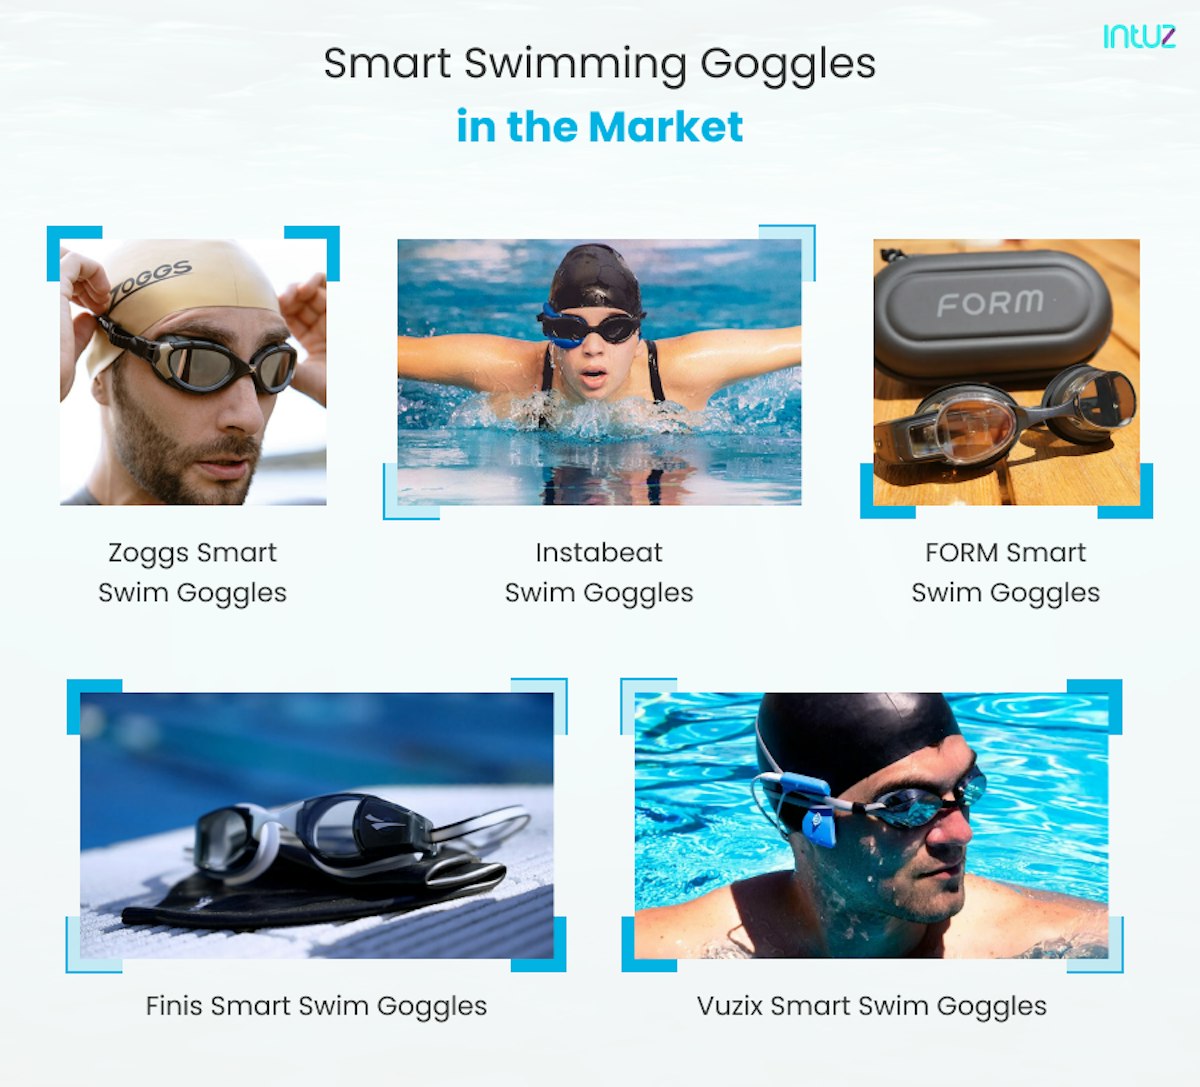 smart swimming goggles in the market